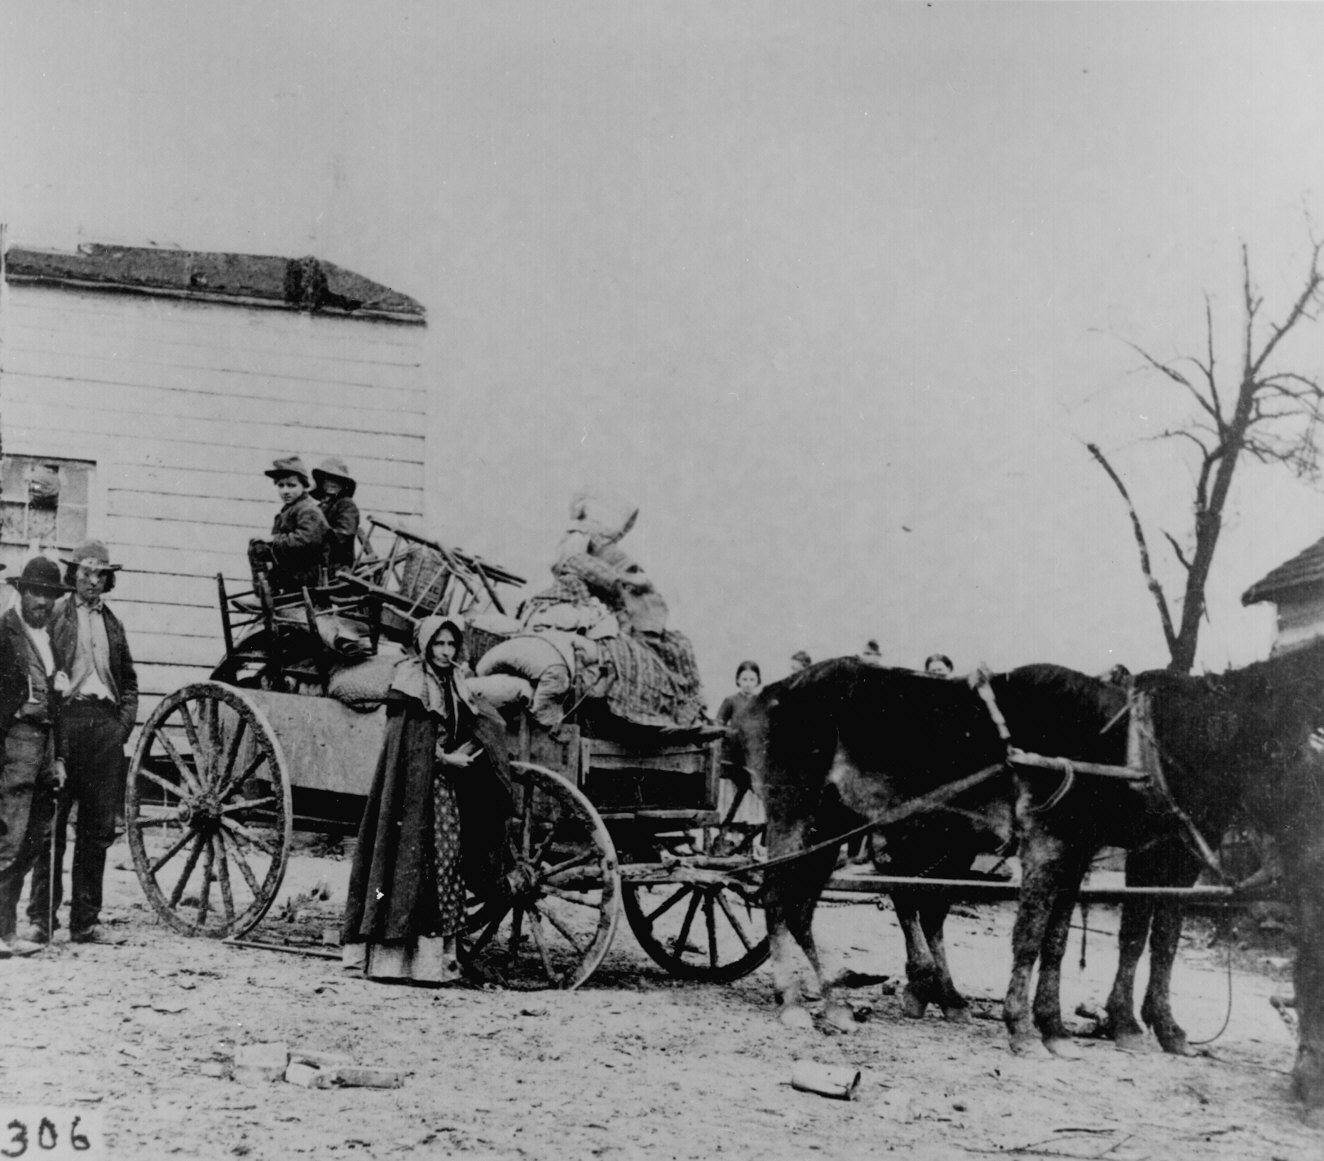 Photo of a refugee family leaving a war area with belongings loaded on a cart, National Archives and Records Administration Civil War Photos, 200-CC-306